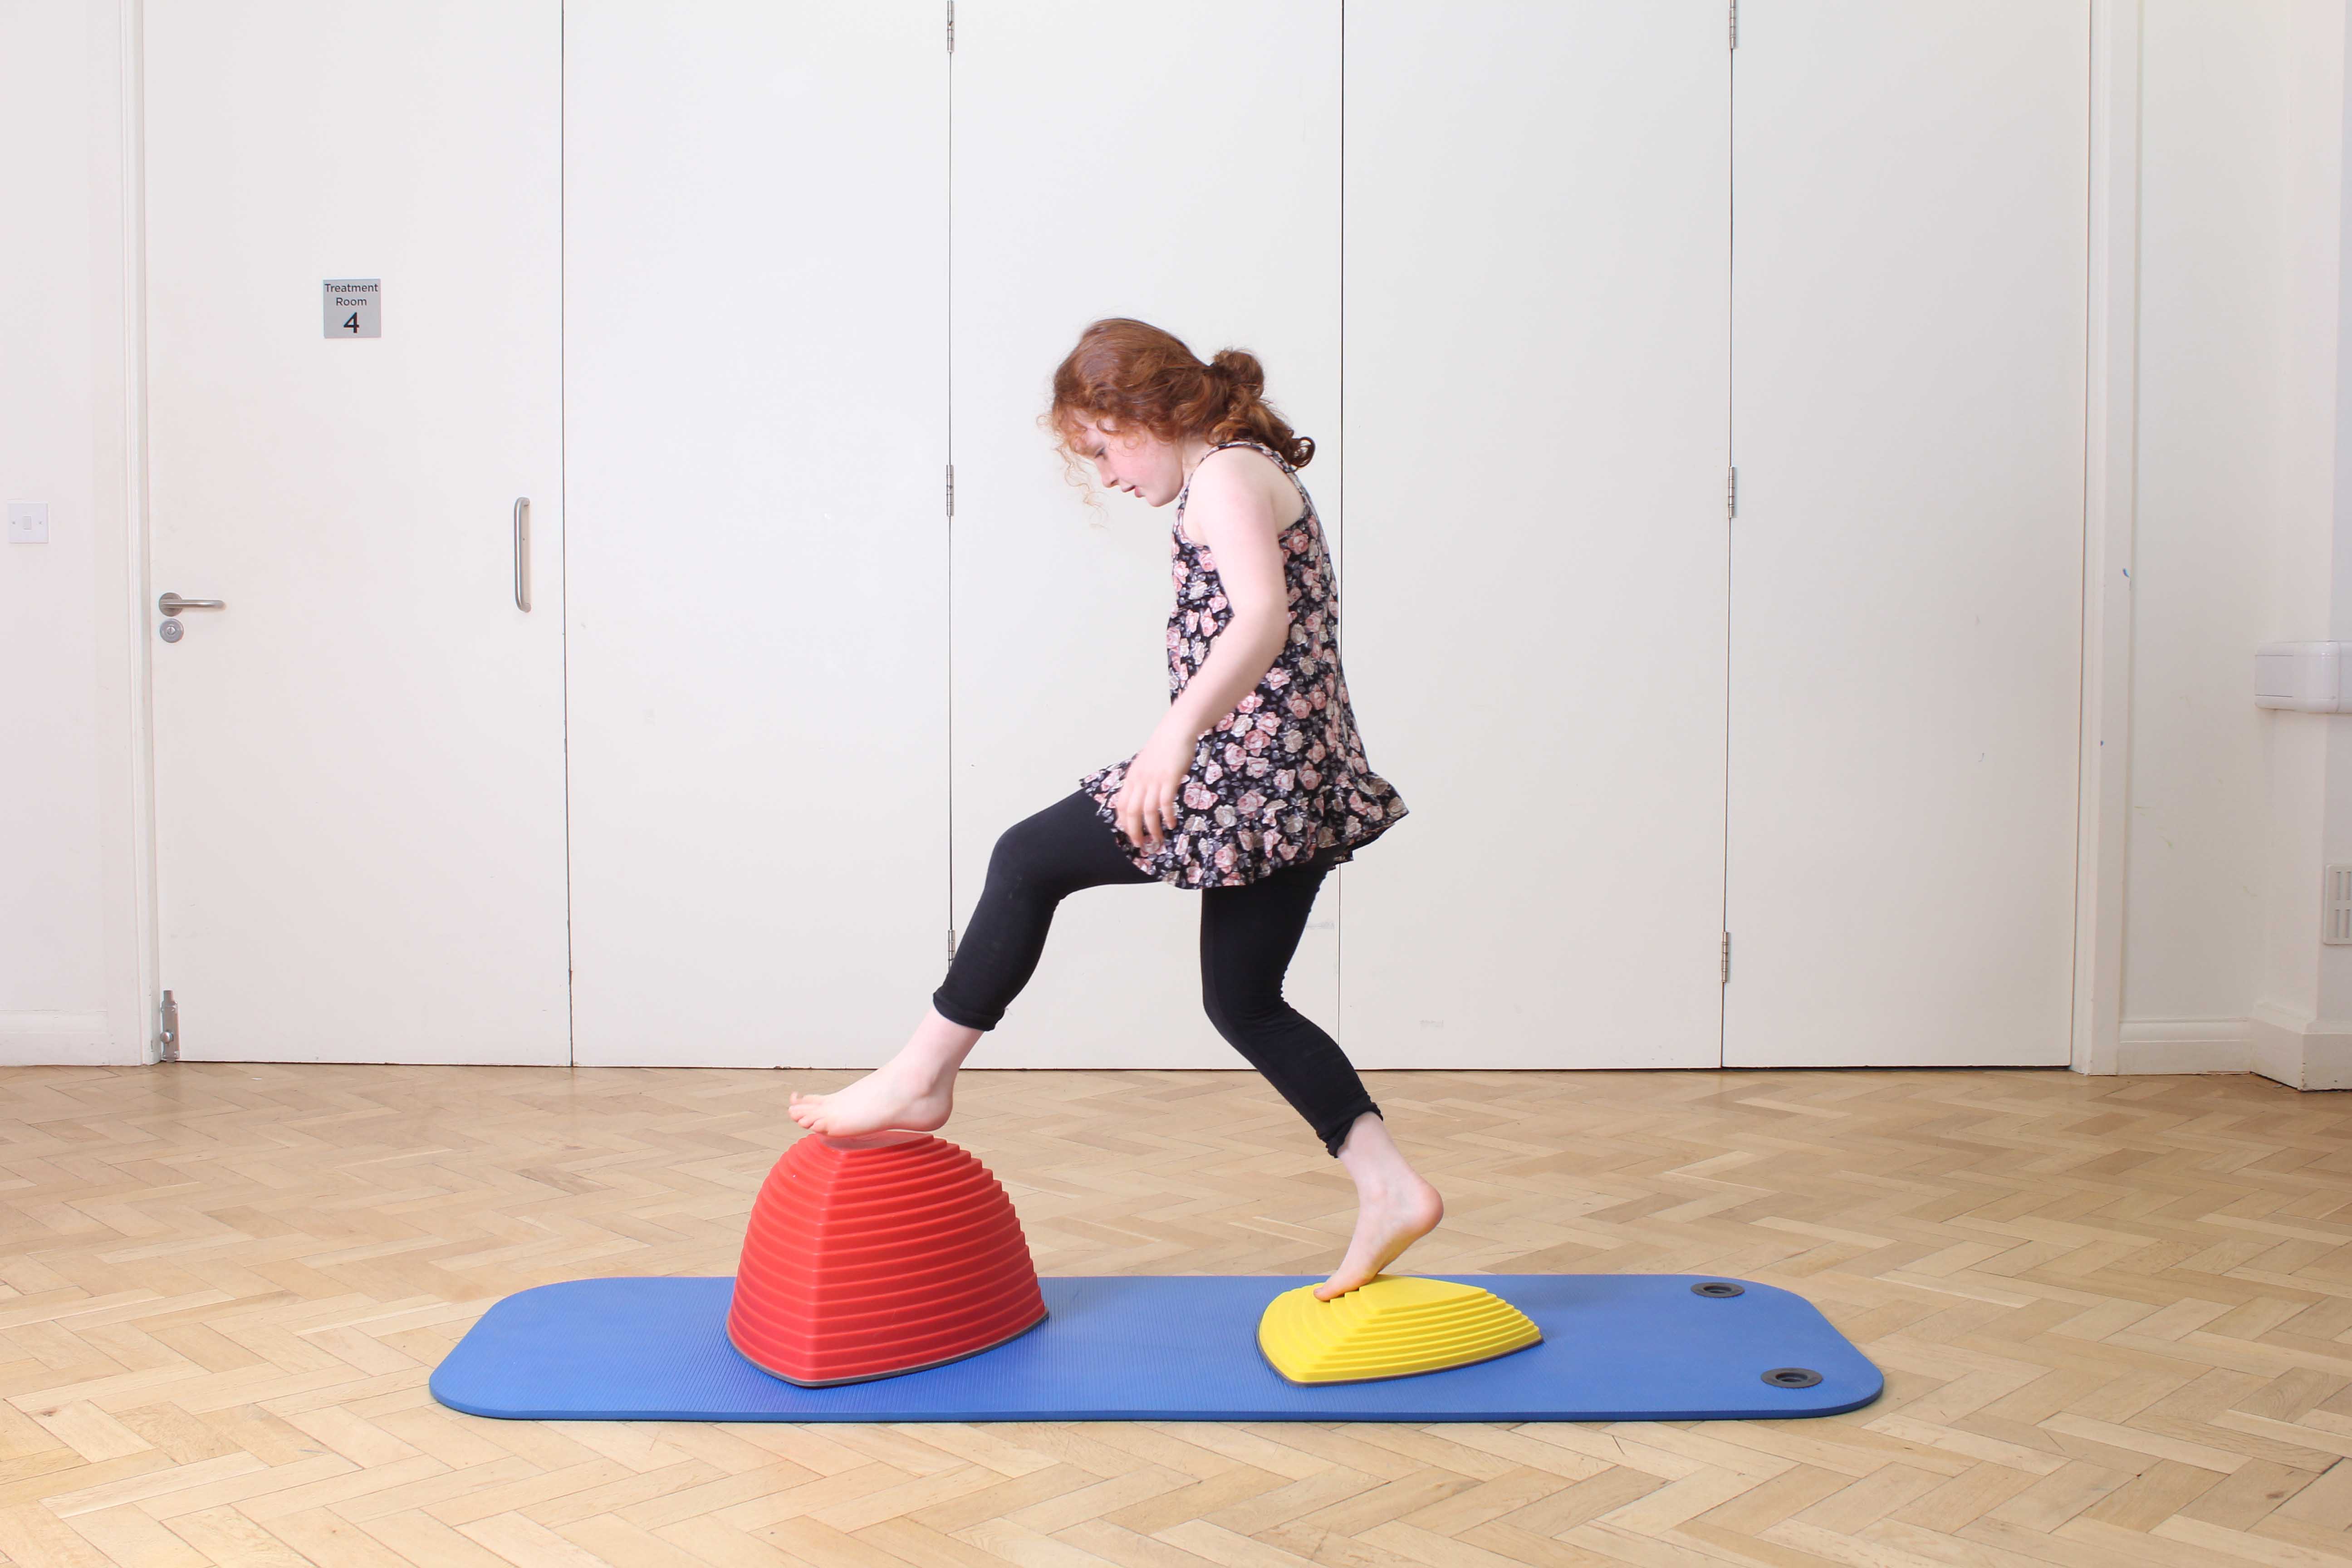 Using play to engage children in functional exercise and improve physical ability